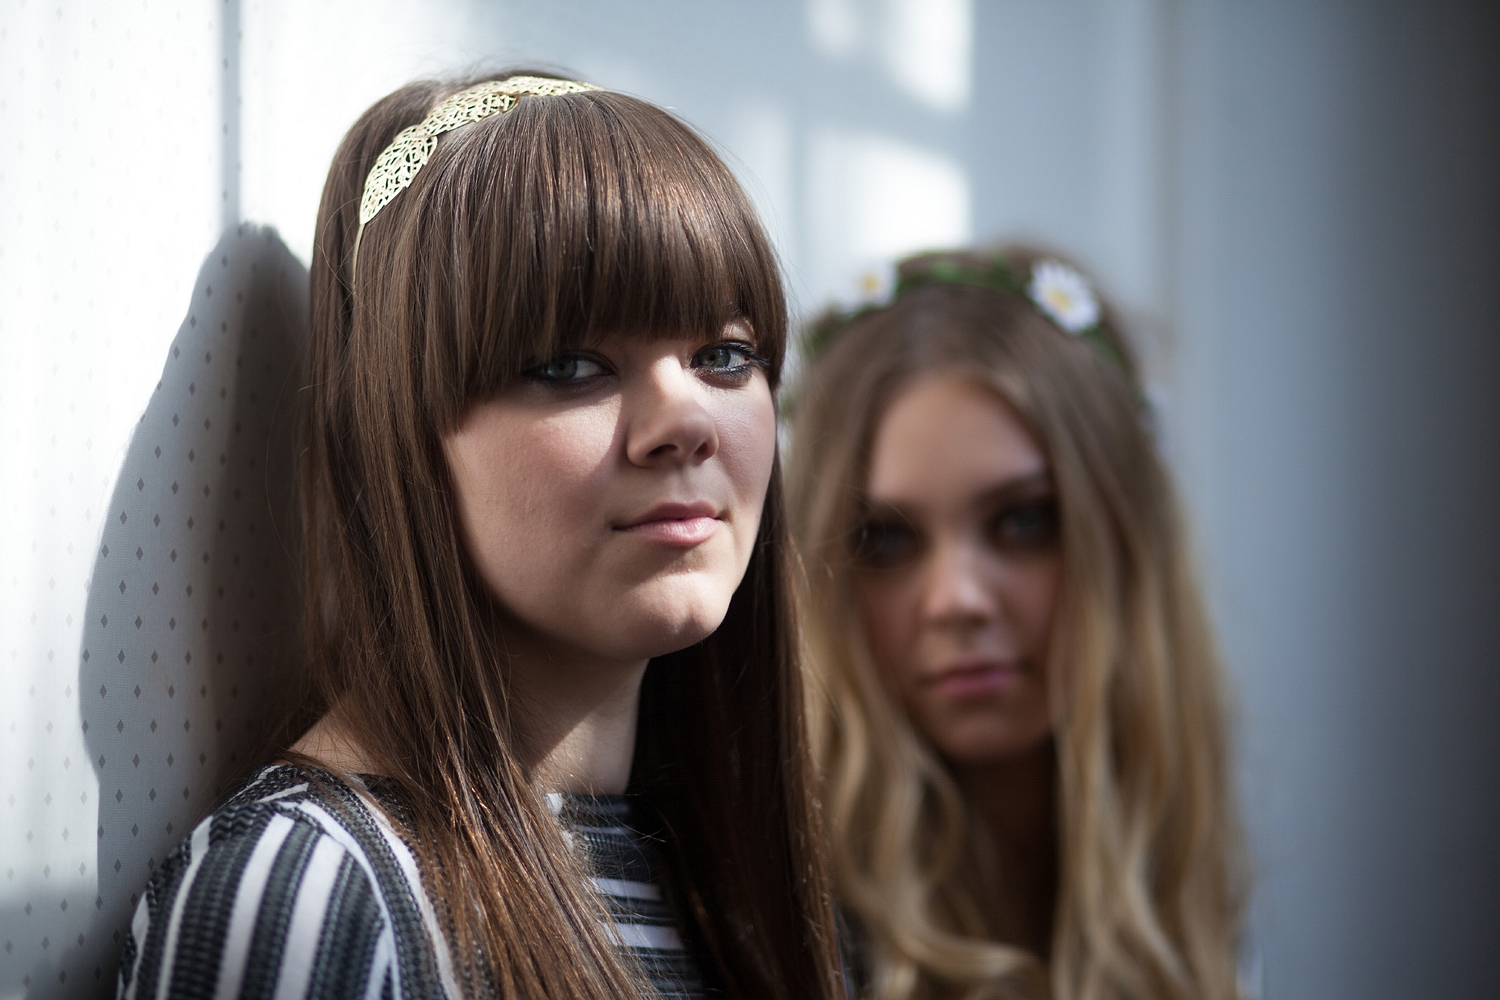 Watch First Aid Kit cover Jack White’s ‘Love Interruption’